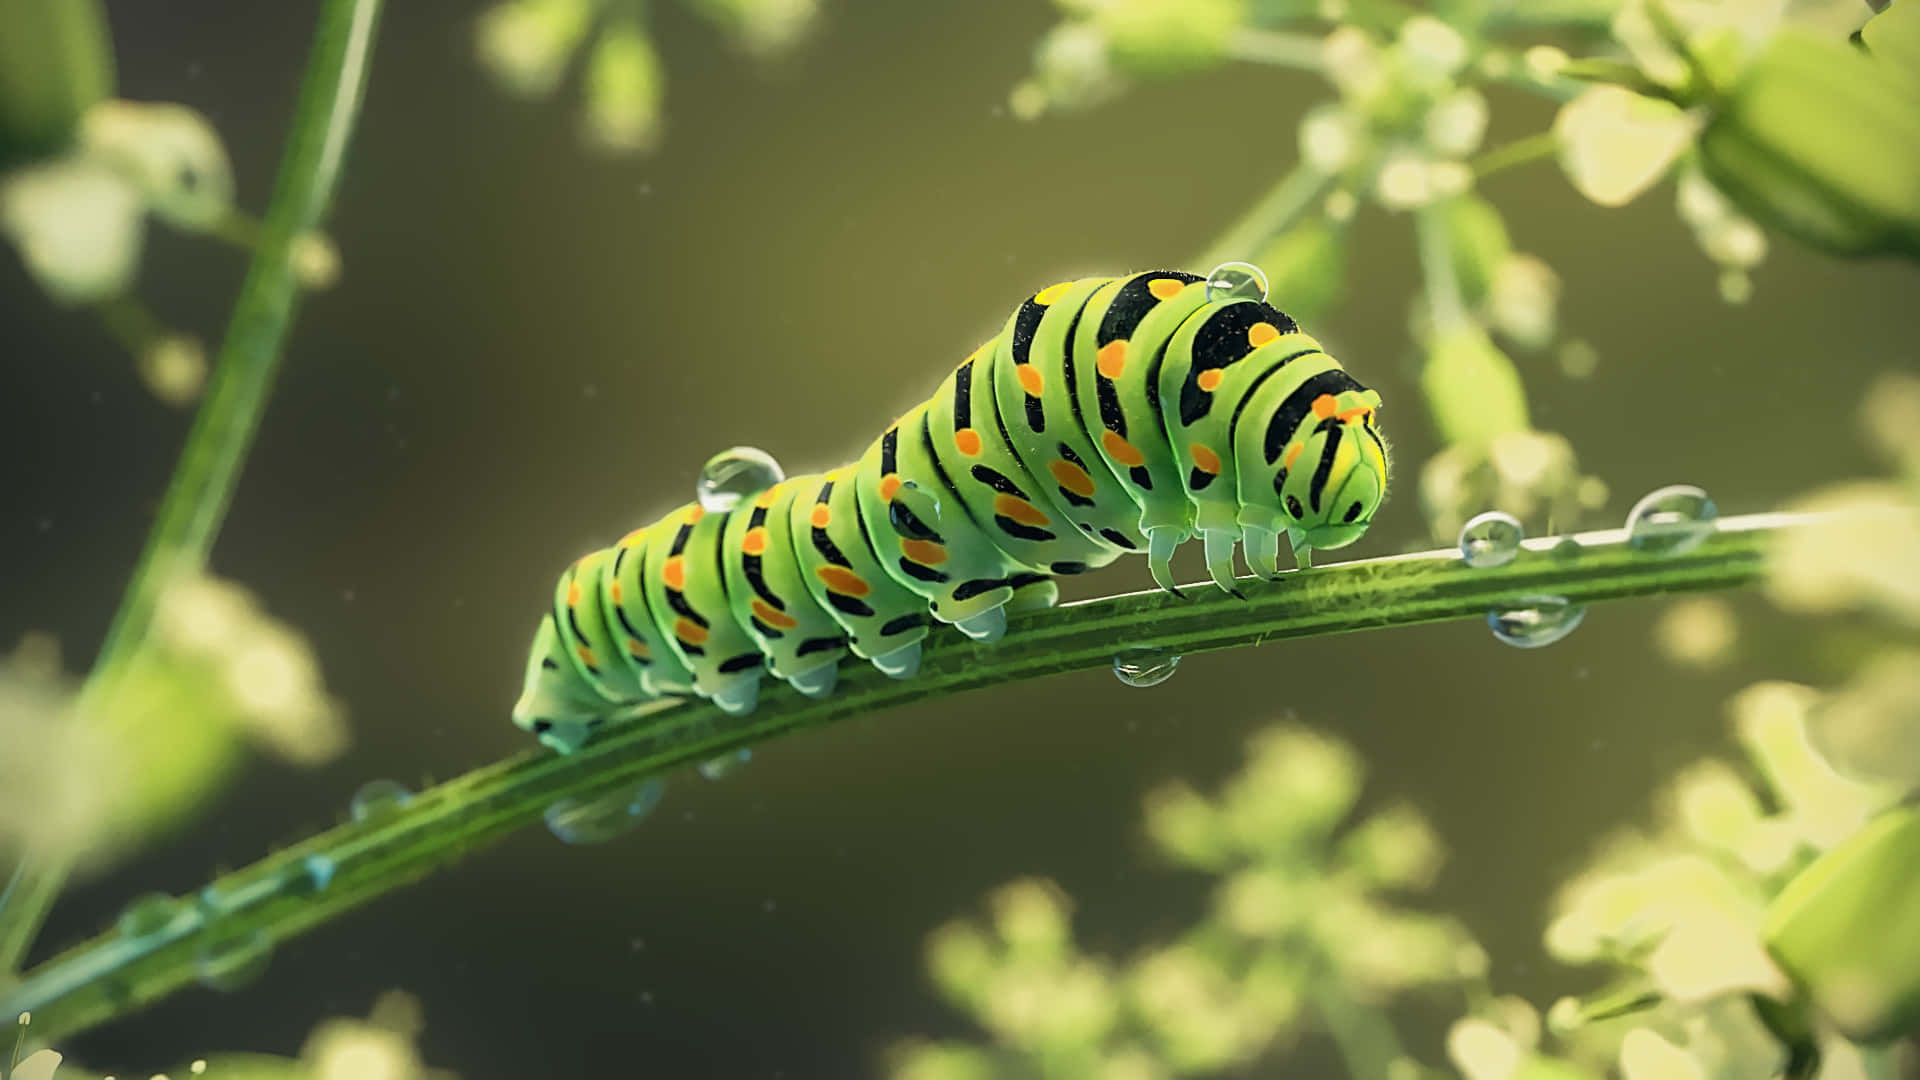 A Caterpillar Is Sitting On A Plant With Water Drops